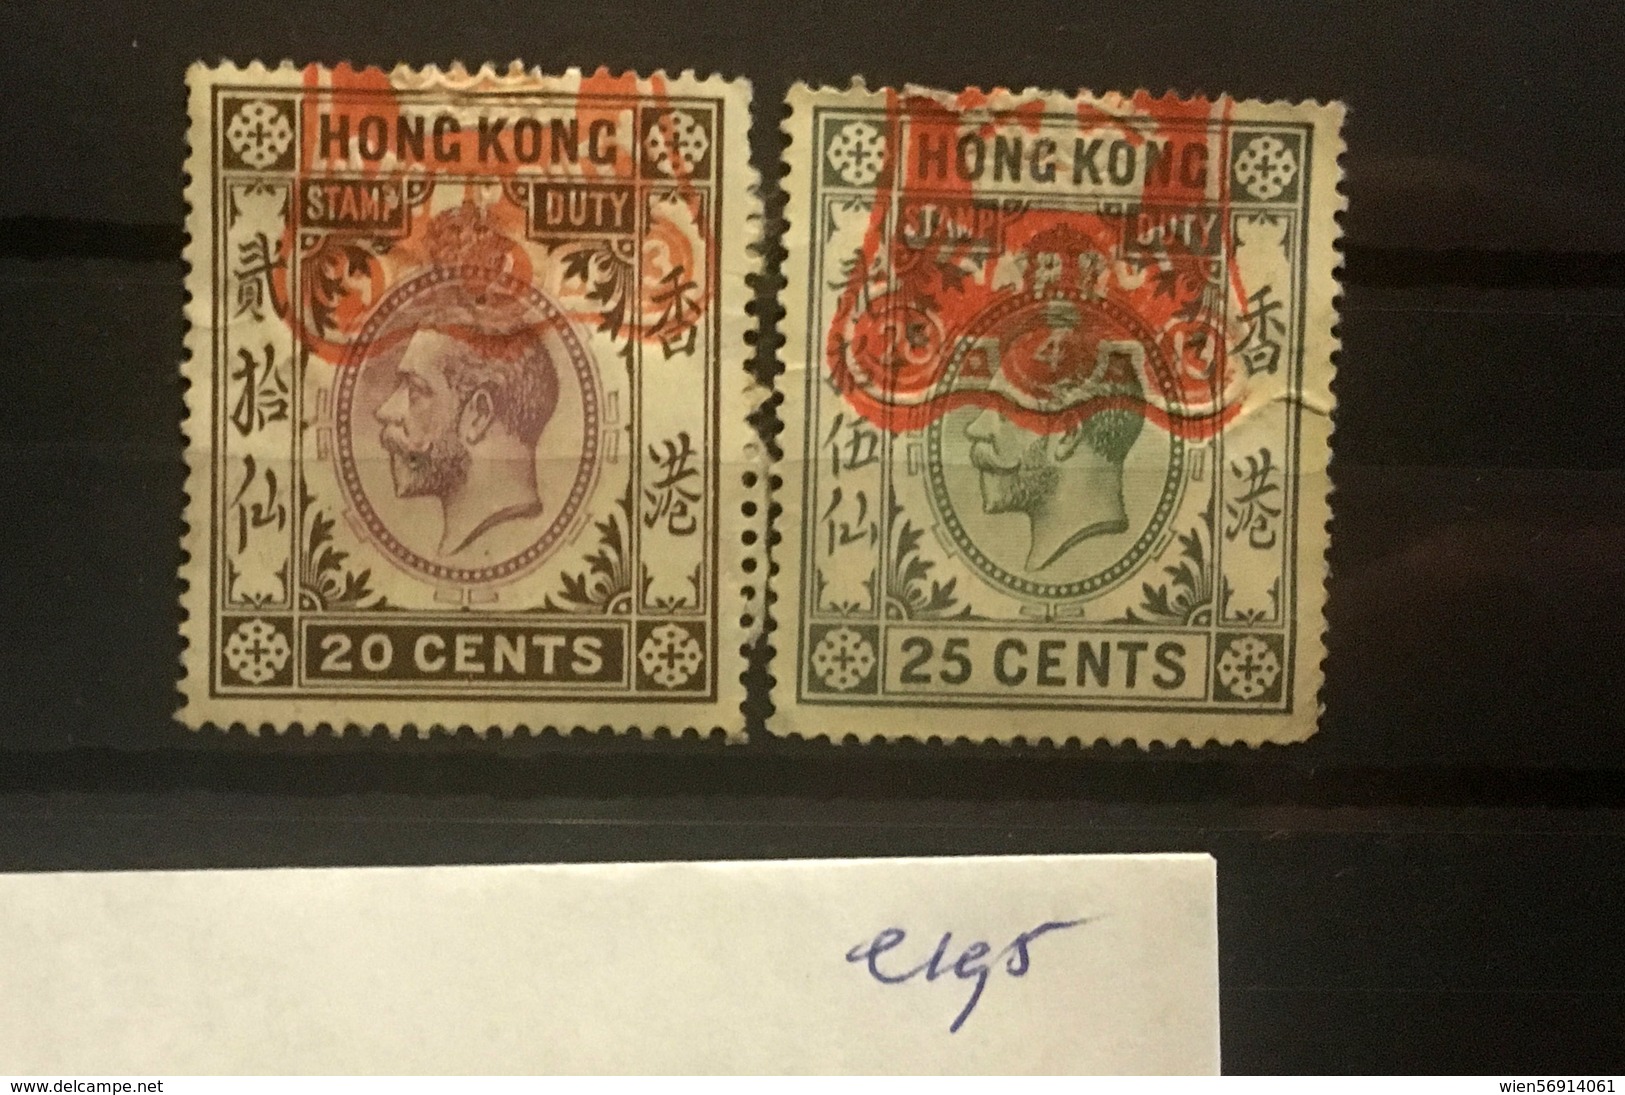 E195 Hong Kong Collection - Postal Fiscal Stamps